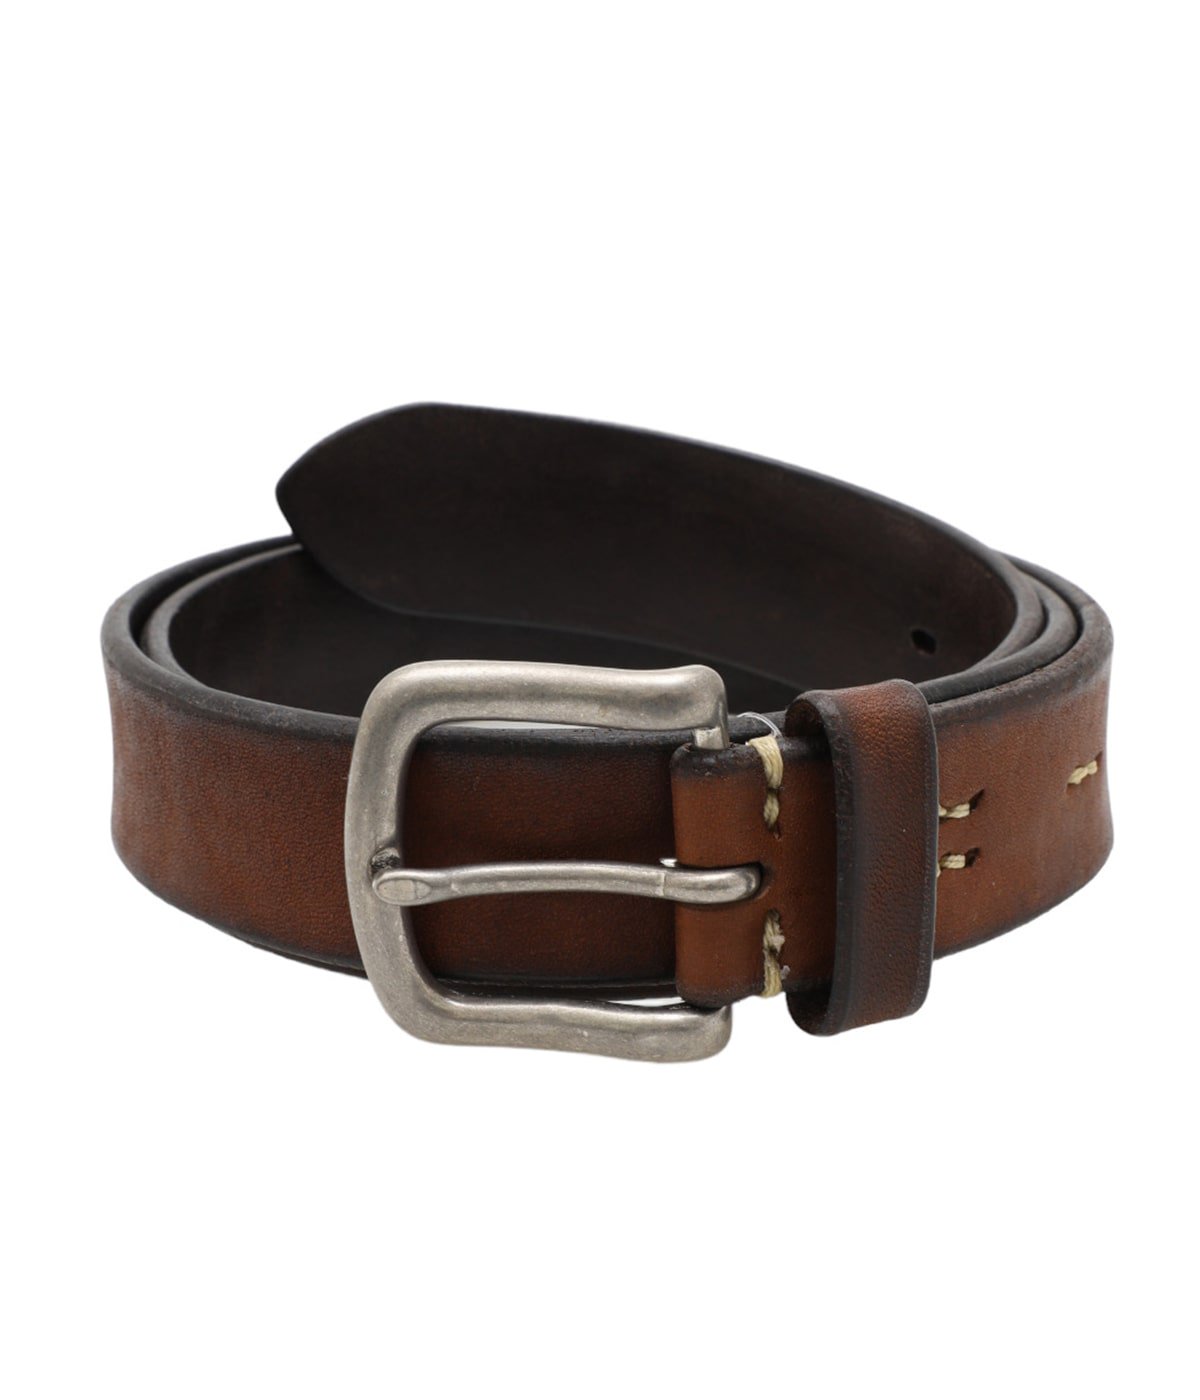 DH5702 HAND MADE LEATHER BELT